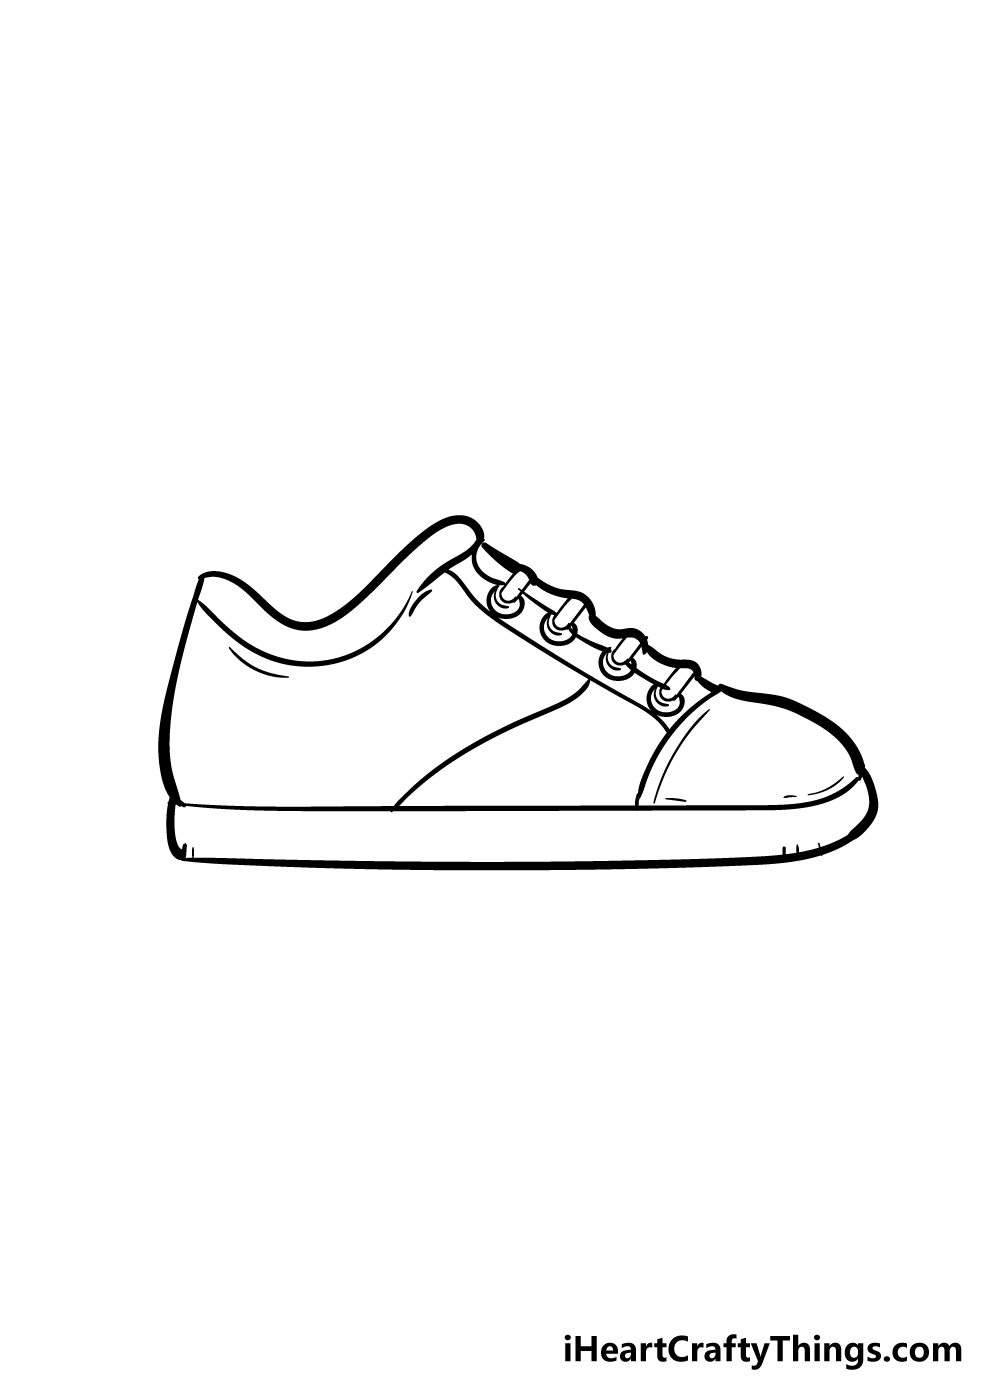 Streng Ripples biografi Shoe Drawing - How To Draw A Shoe Step By Step